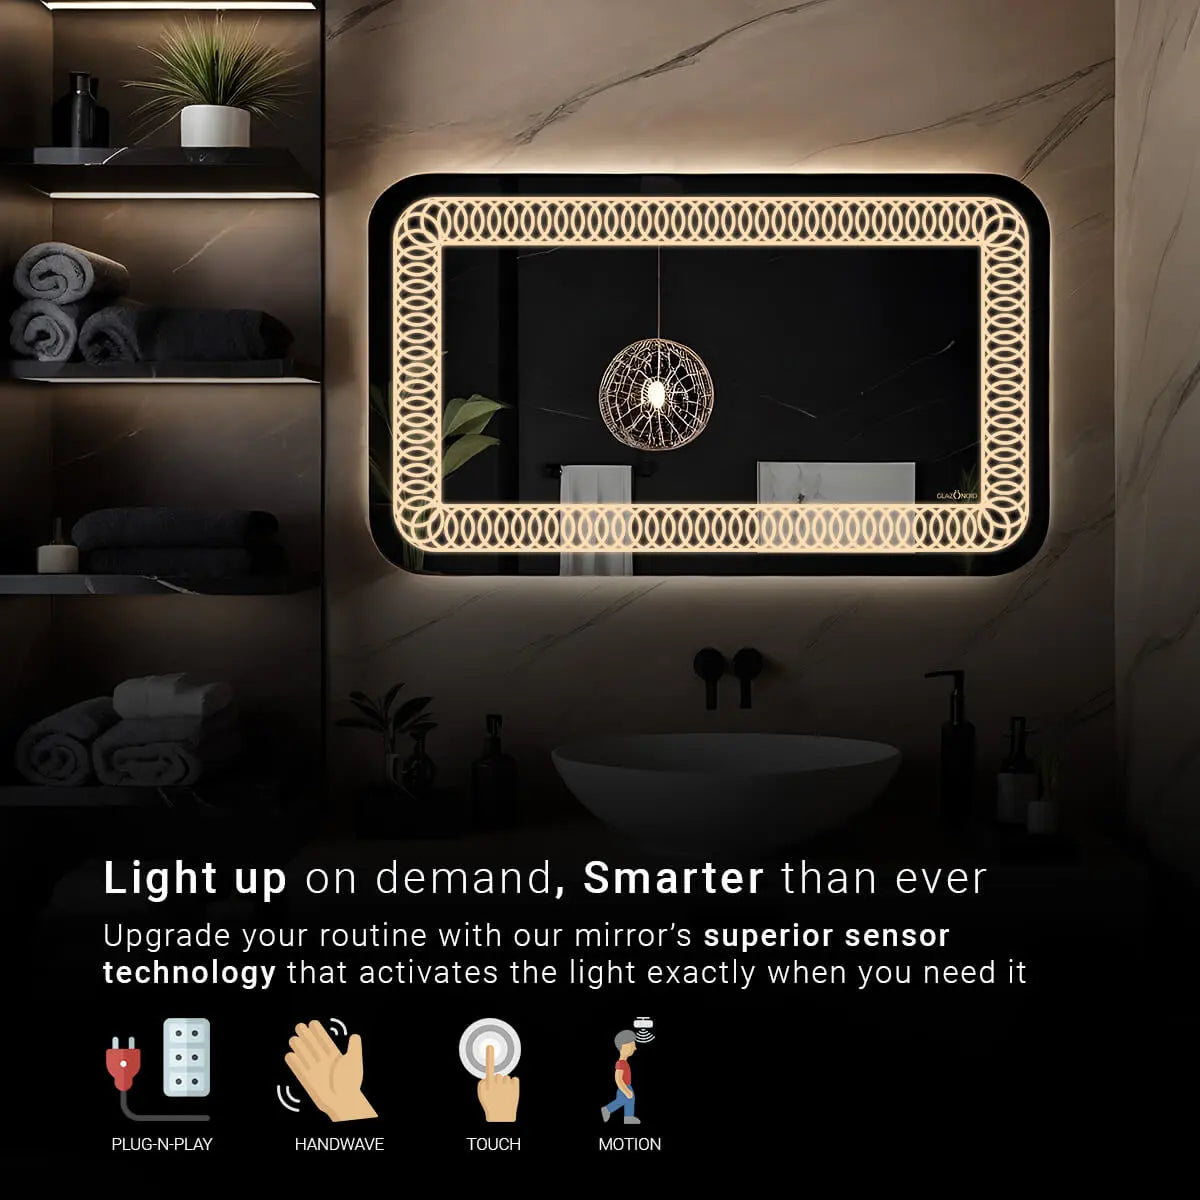 Illuminated bathroom mirror with hi tech sensor technology. Text overlay: "Light up on demand, Smarter than ever. Upgrade your routine with our mirror's superior sensor technology that activates the light exactly when you need it."